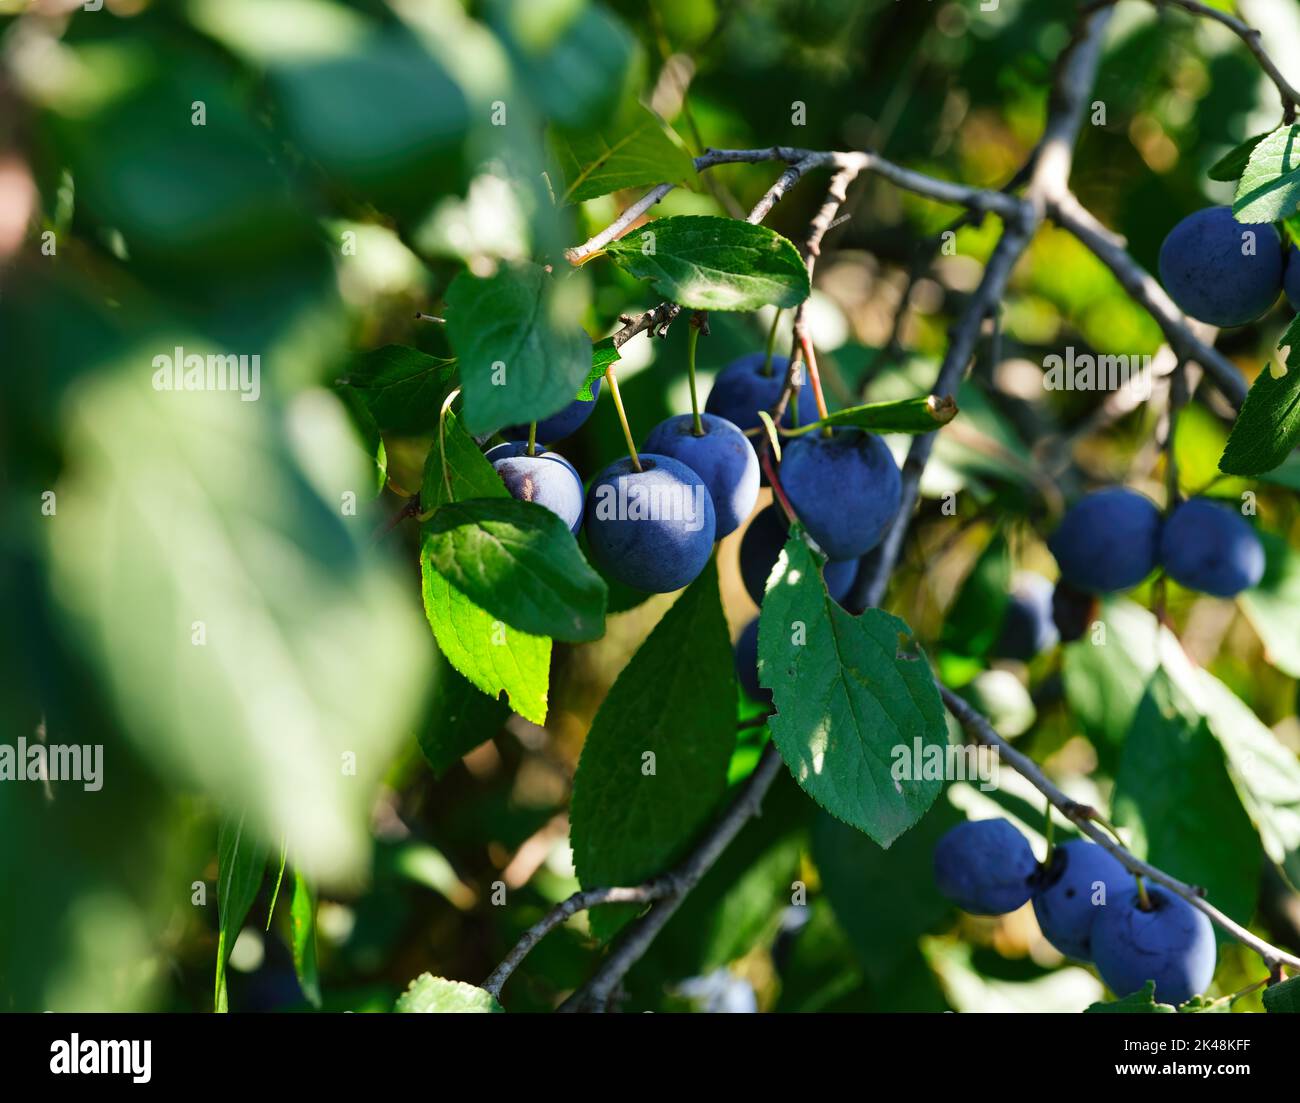 Organic blackthorn fruits (Prunus spinosa) growing on tree branches in the orchard. Stock Photo